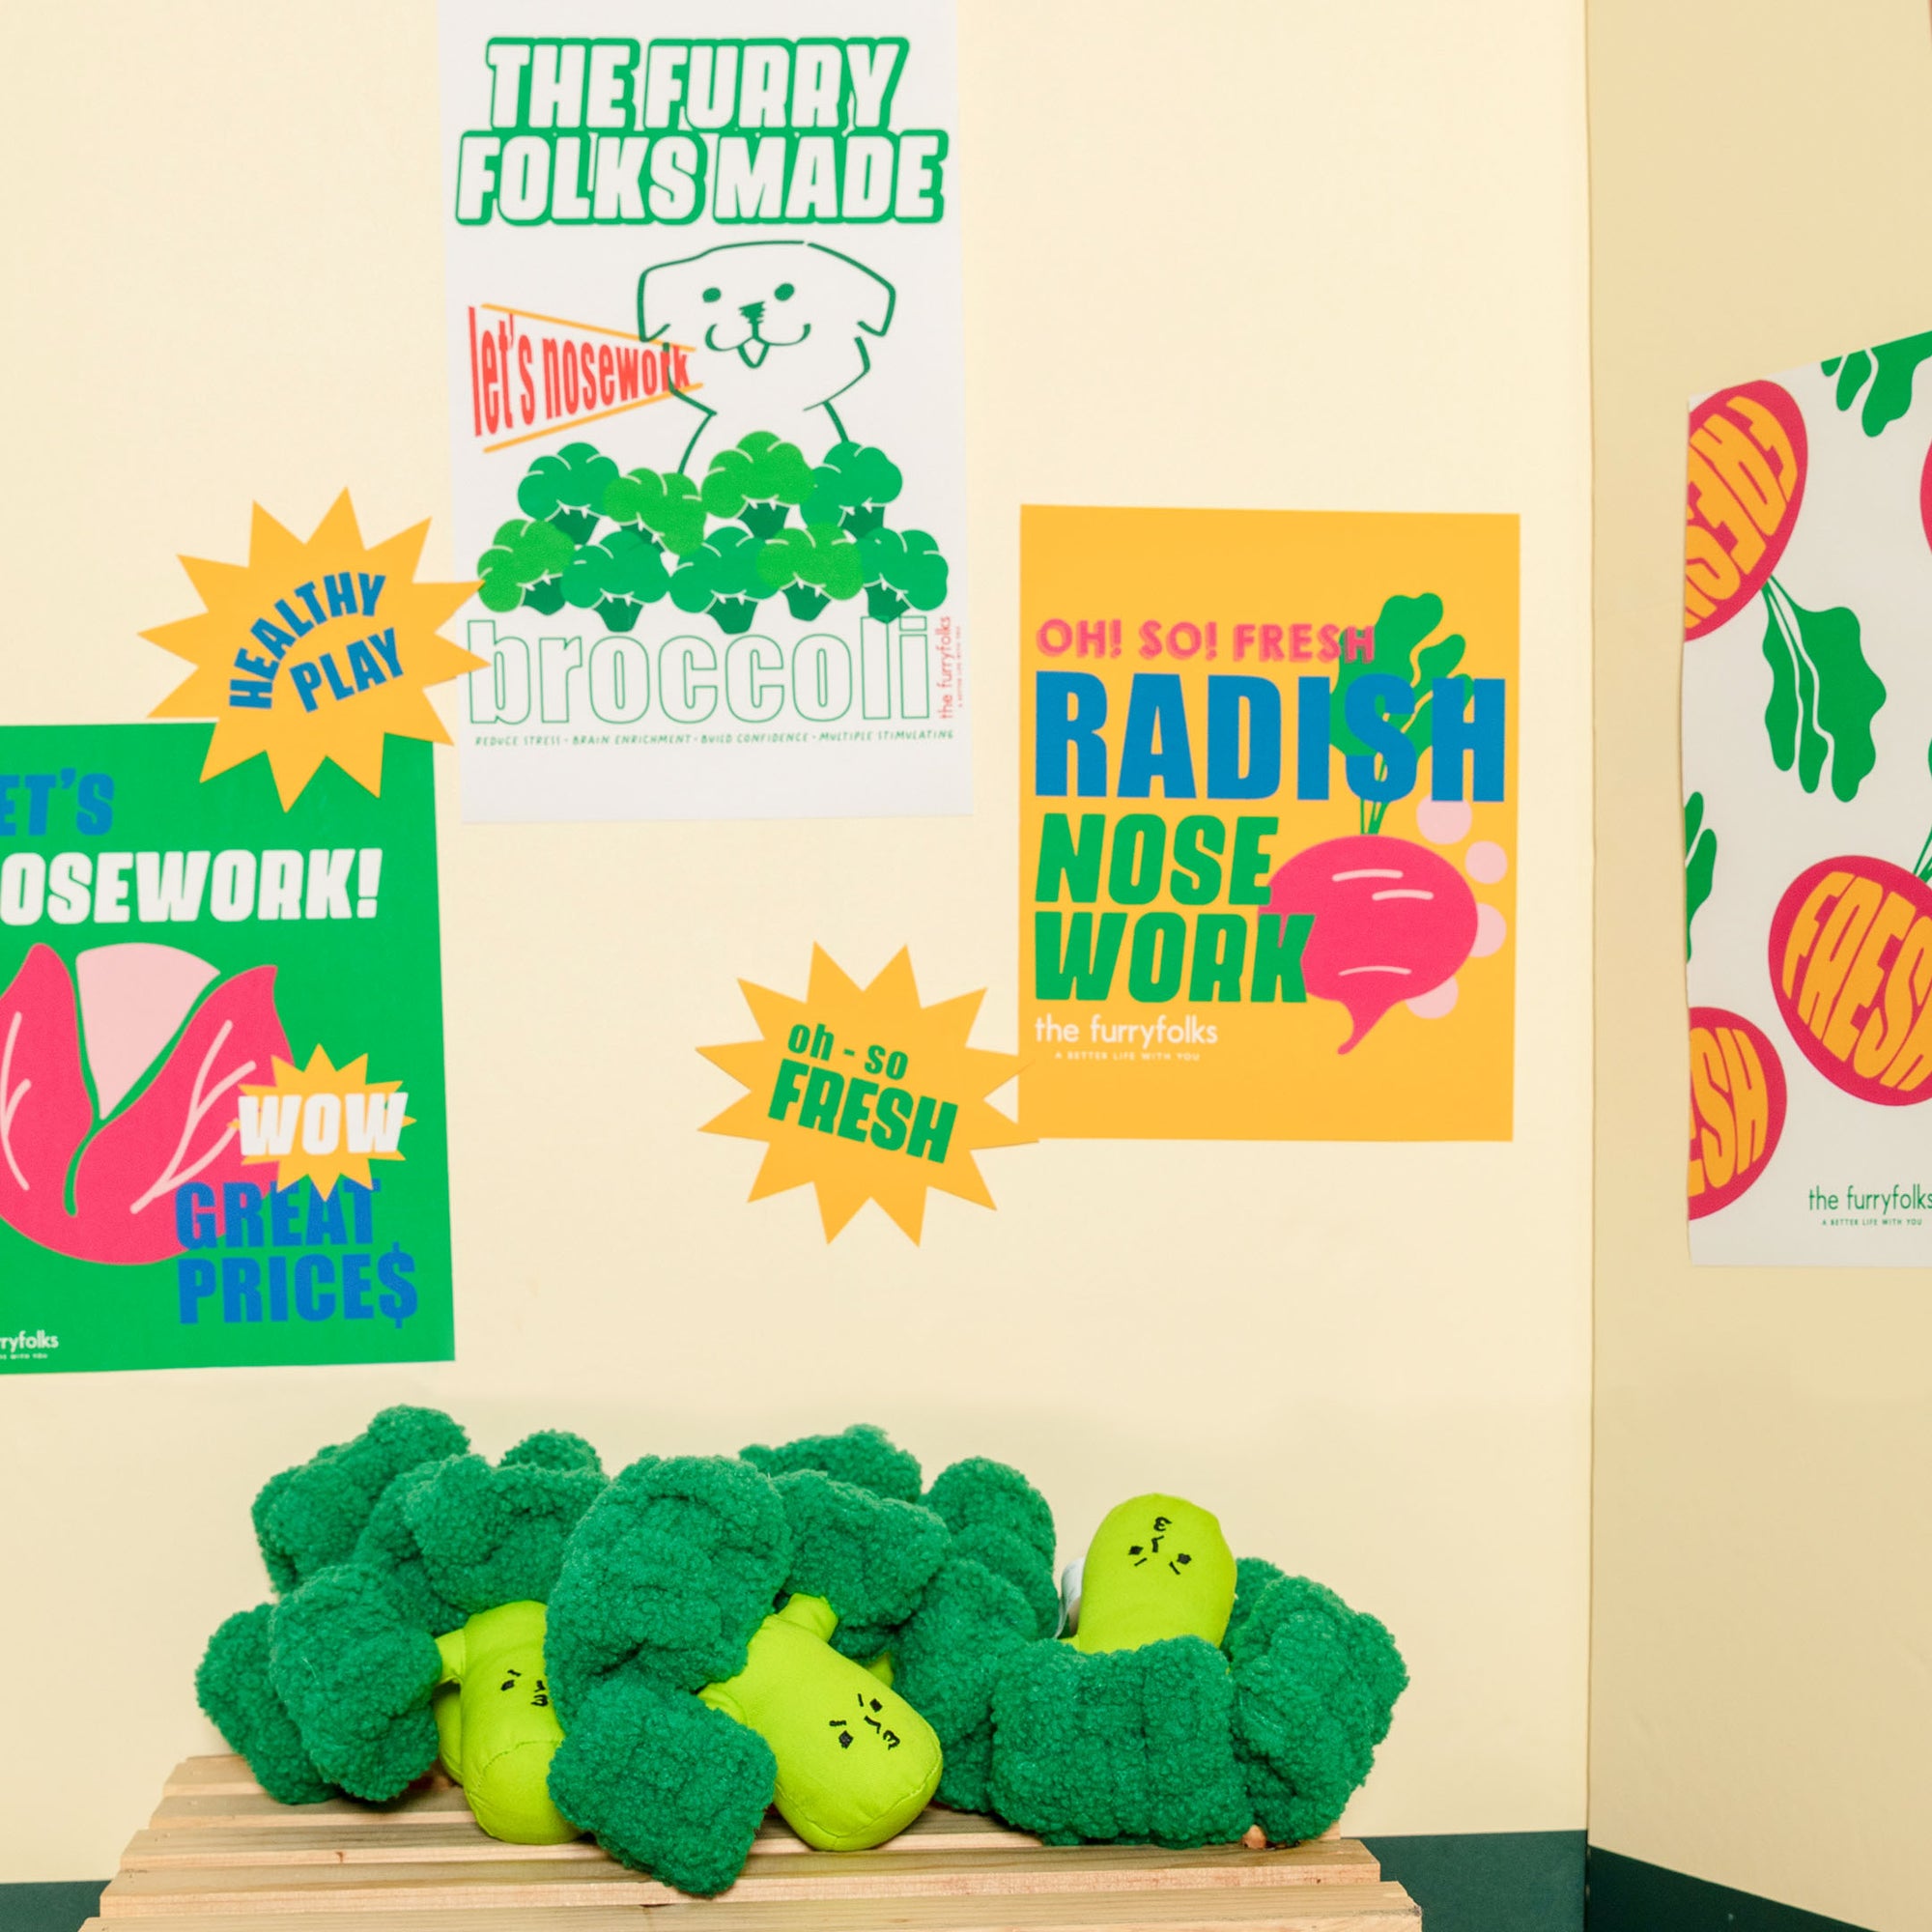 A display of broccoli dog toys with colorful promotional nosework posters in the background.